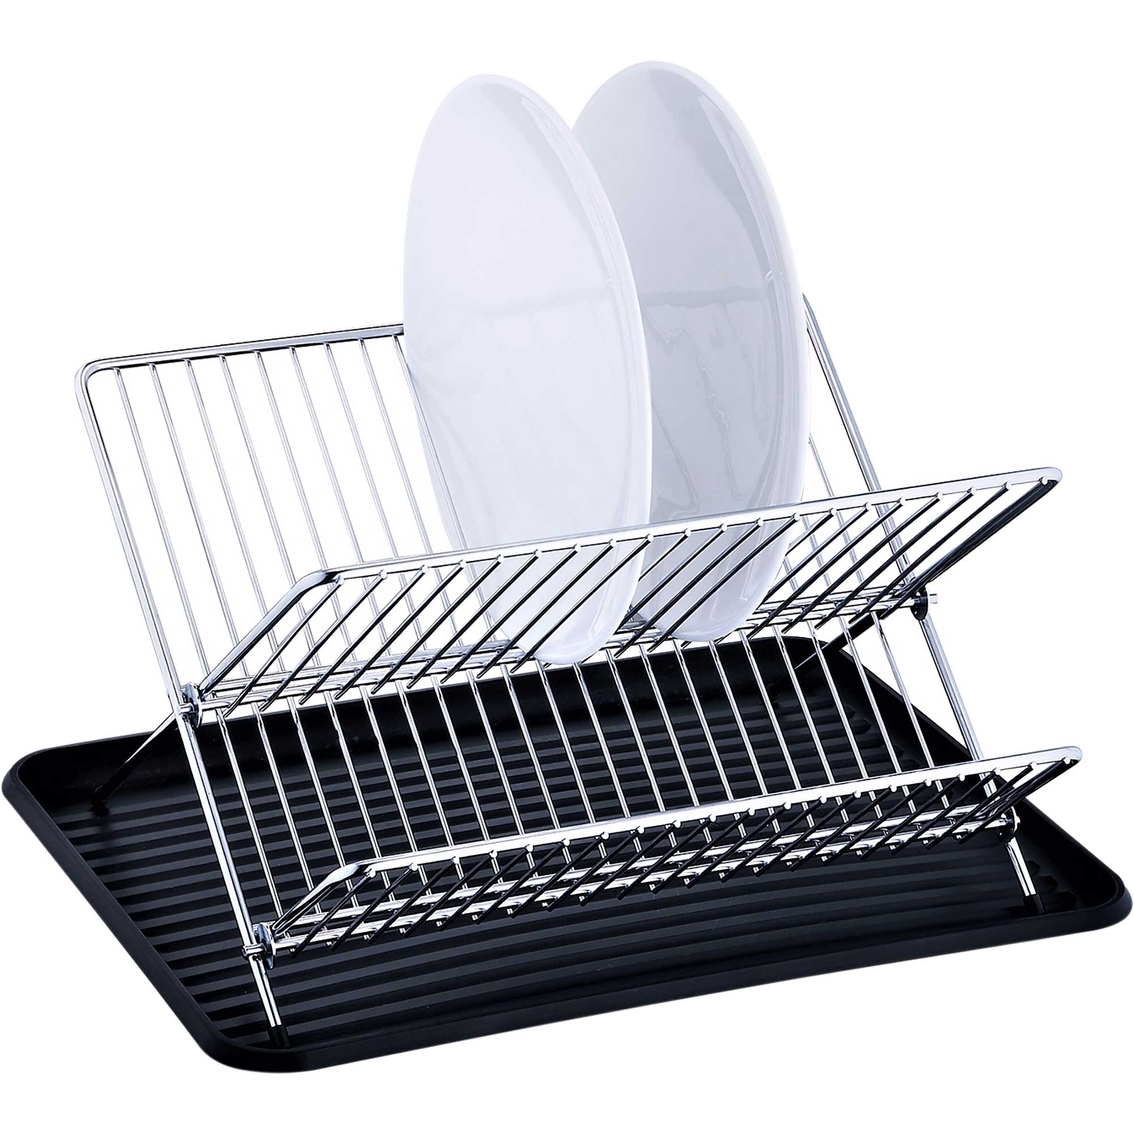 Real Home Small Dish Drainer with Cup